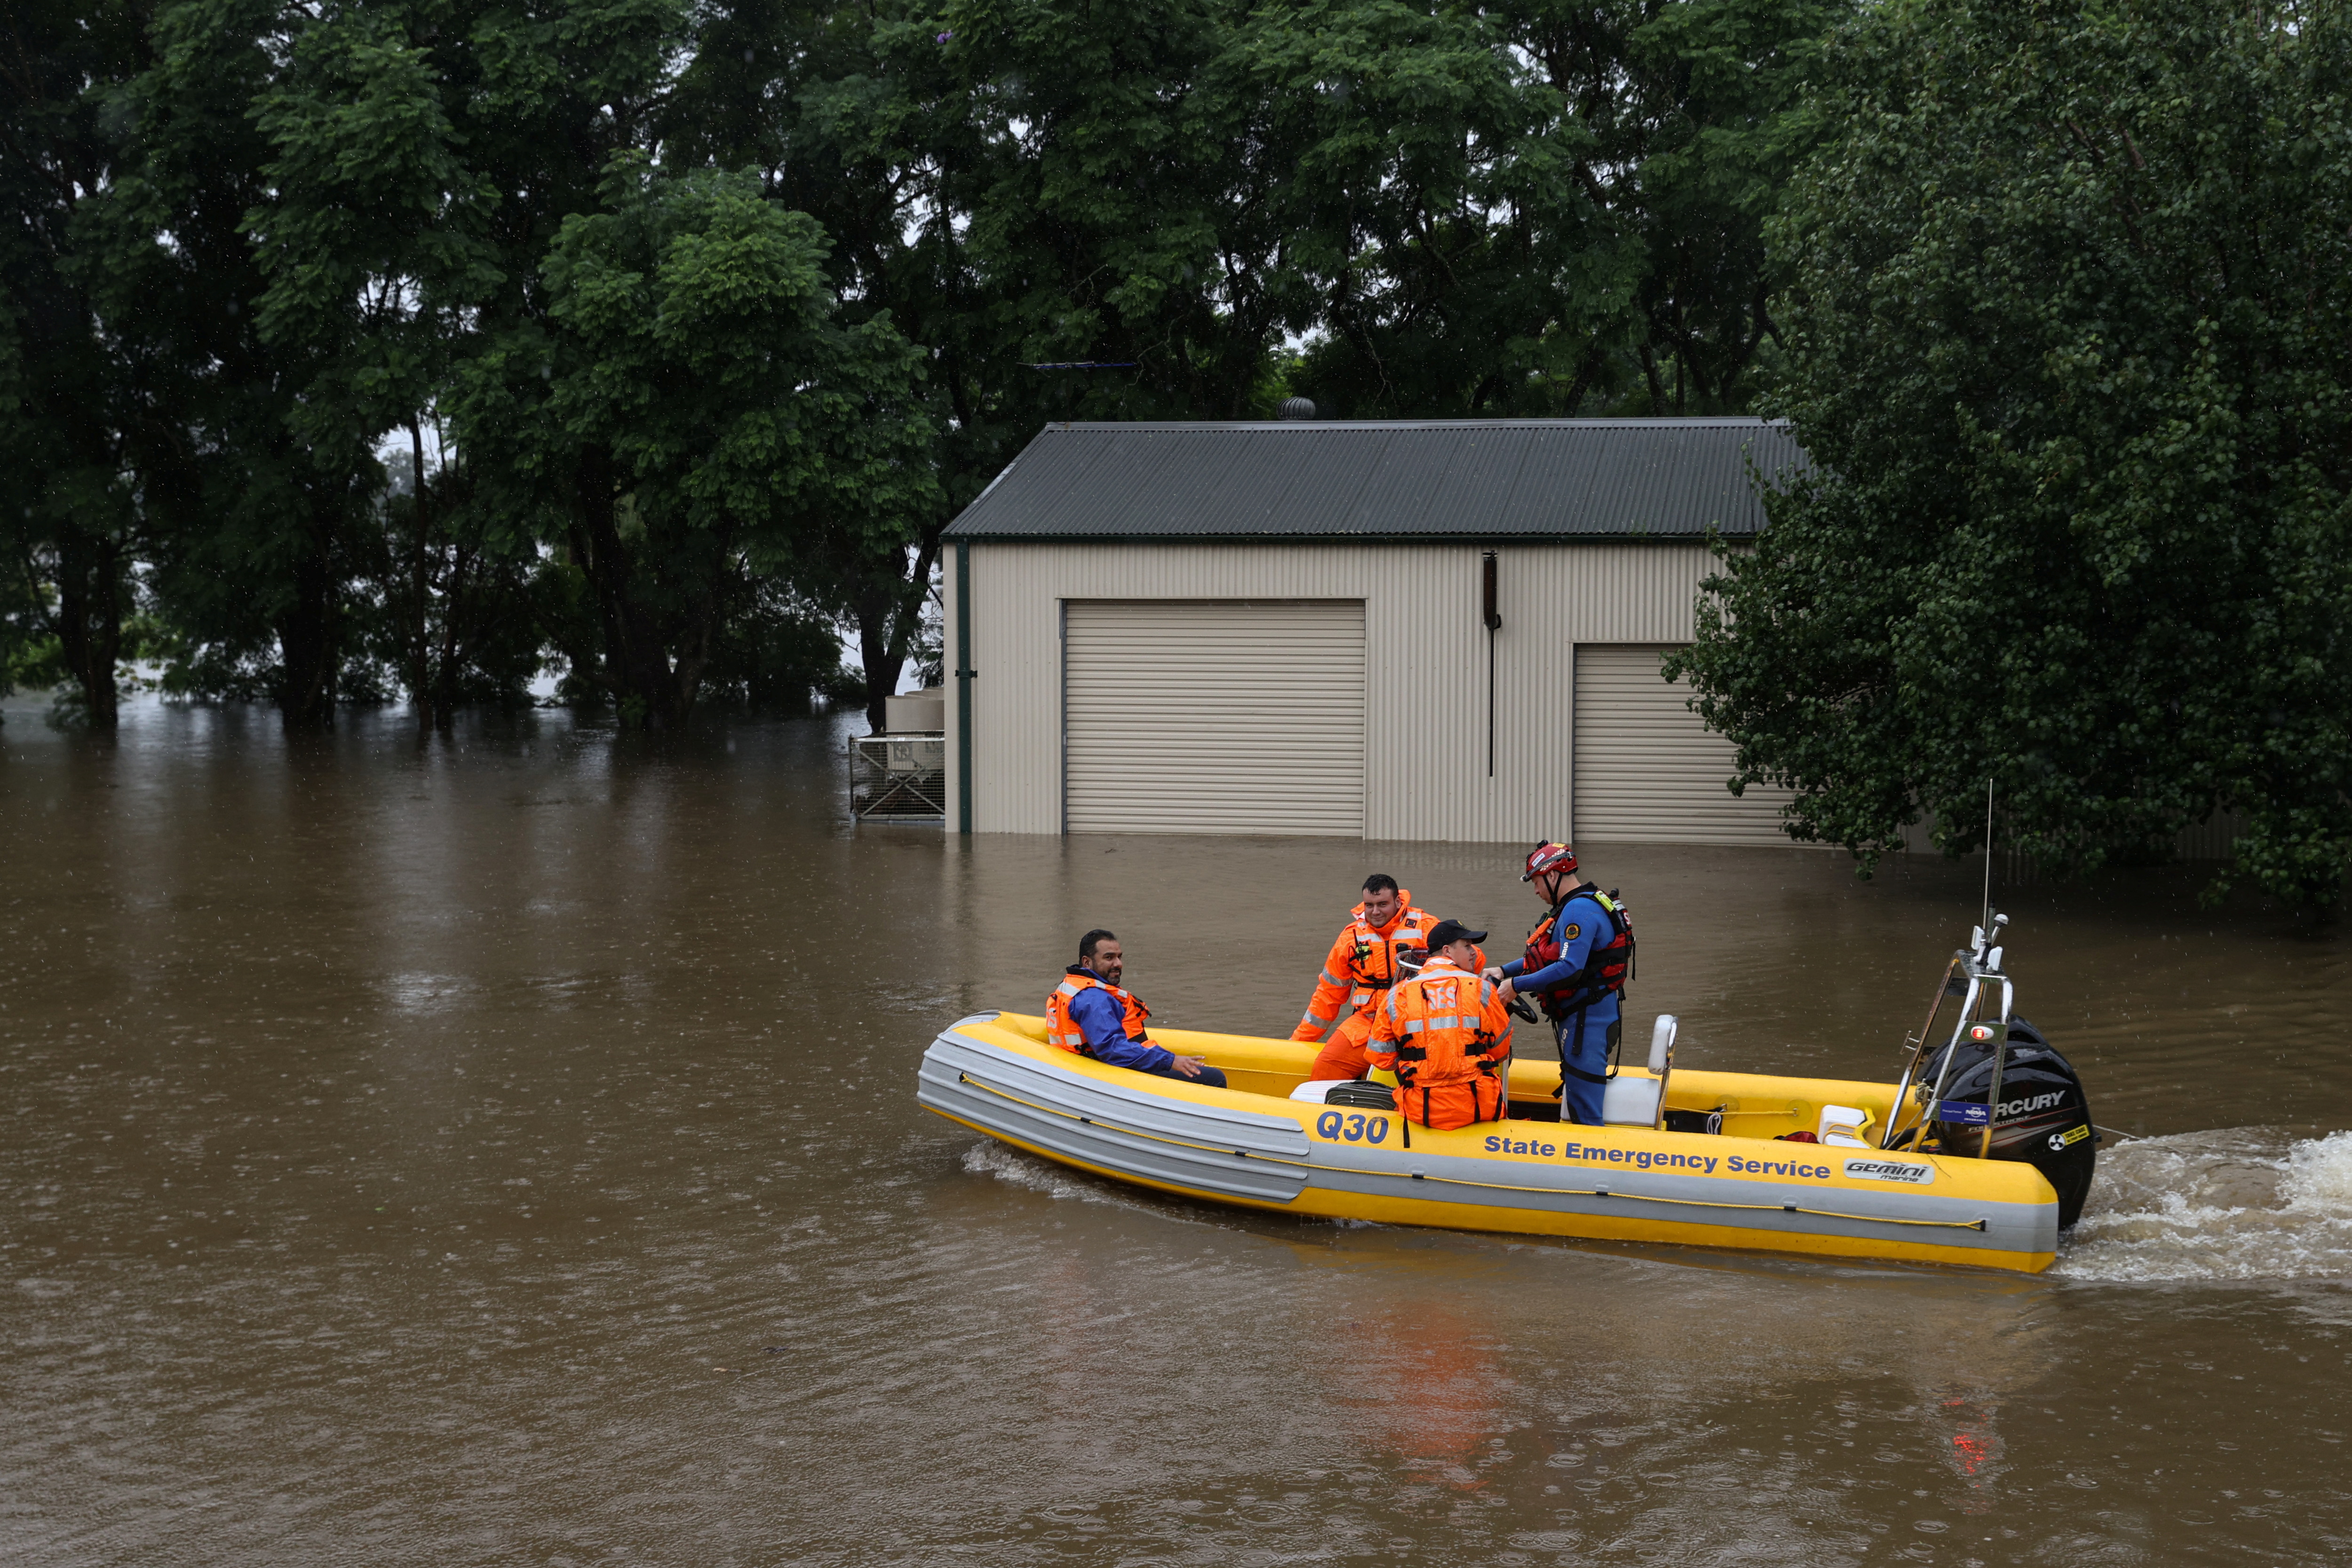 SES personnel carry out an operation during severe flooding in Sydney